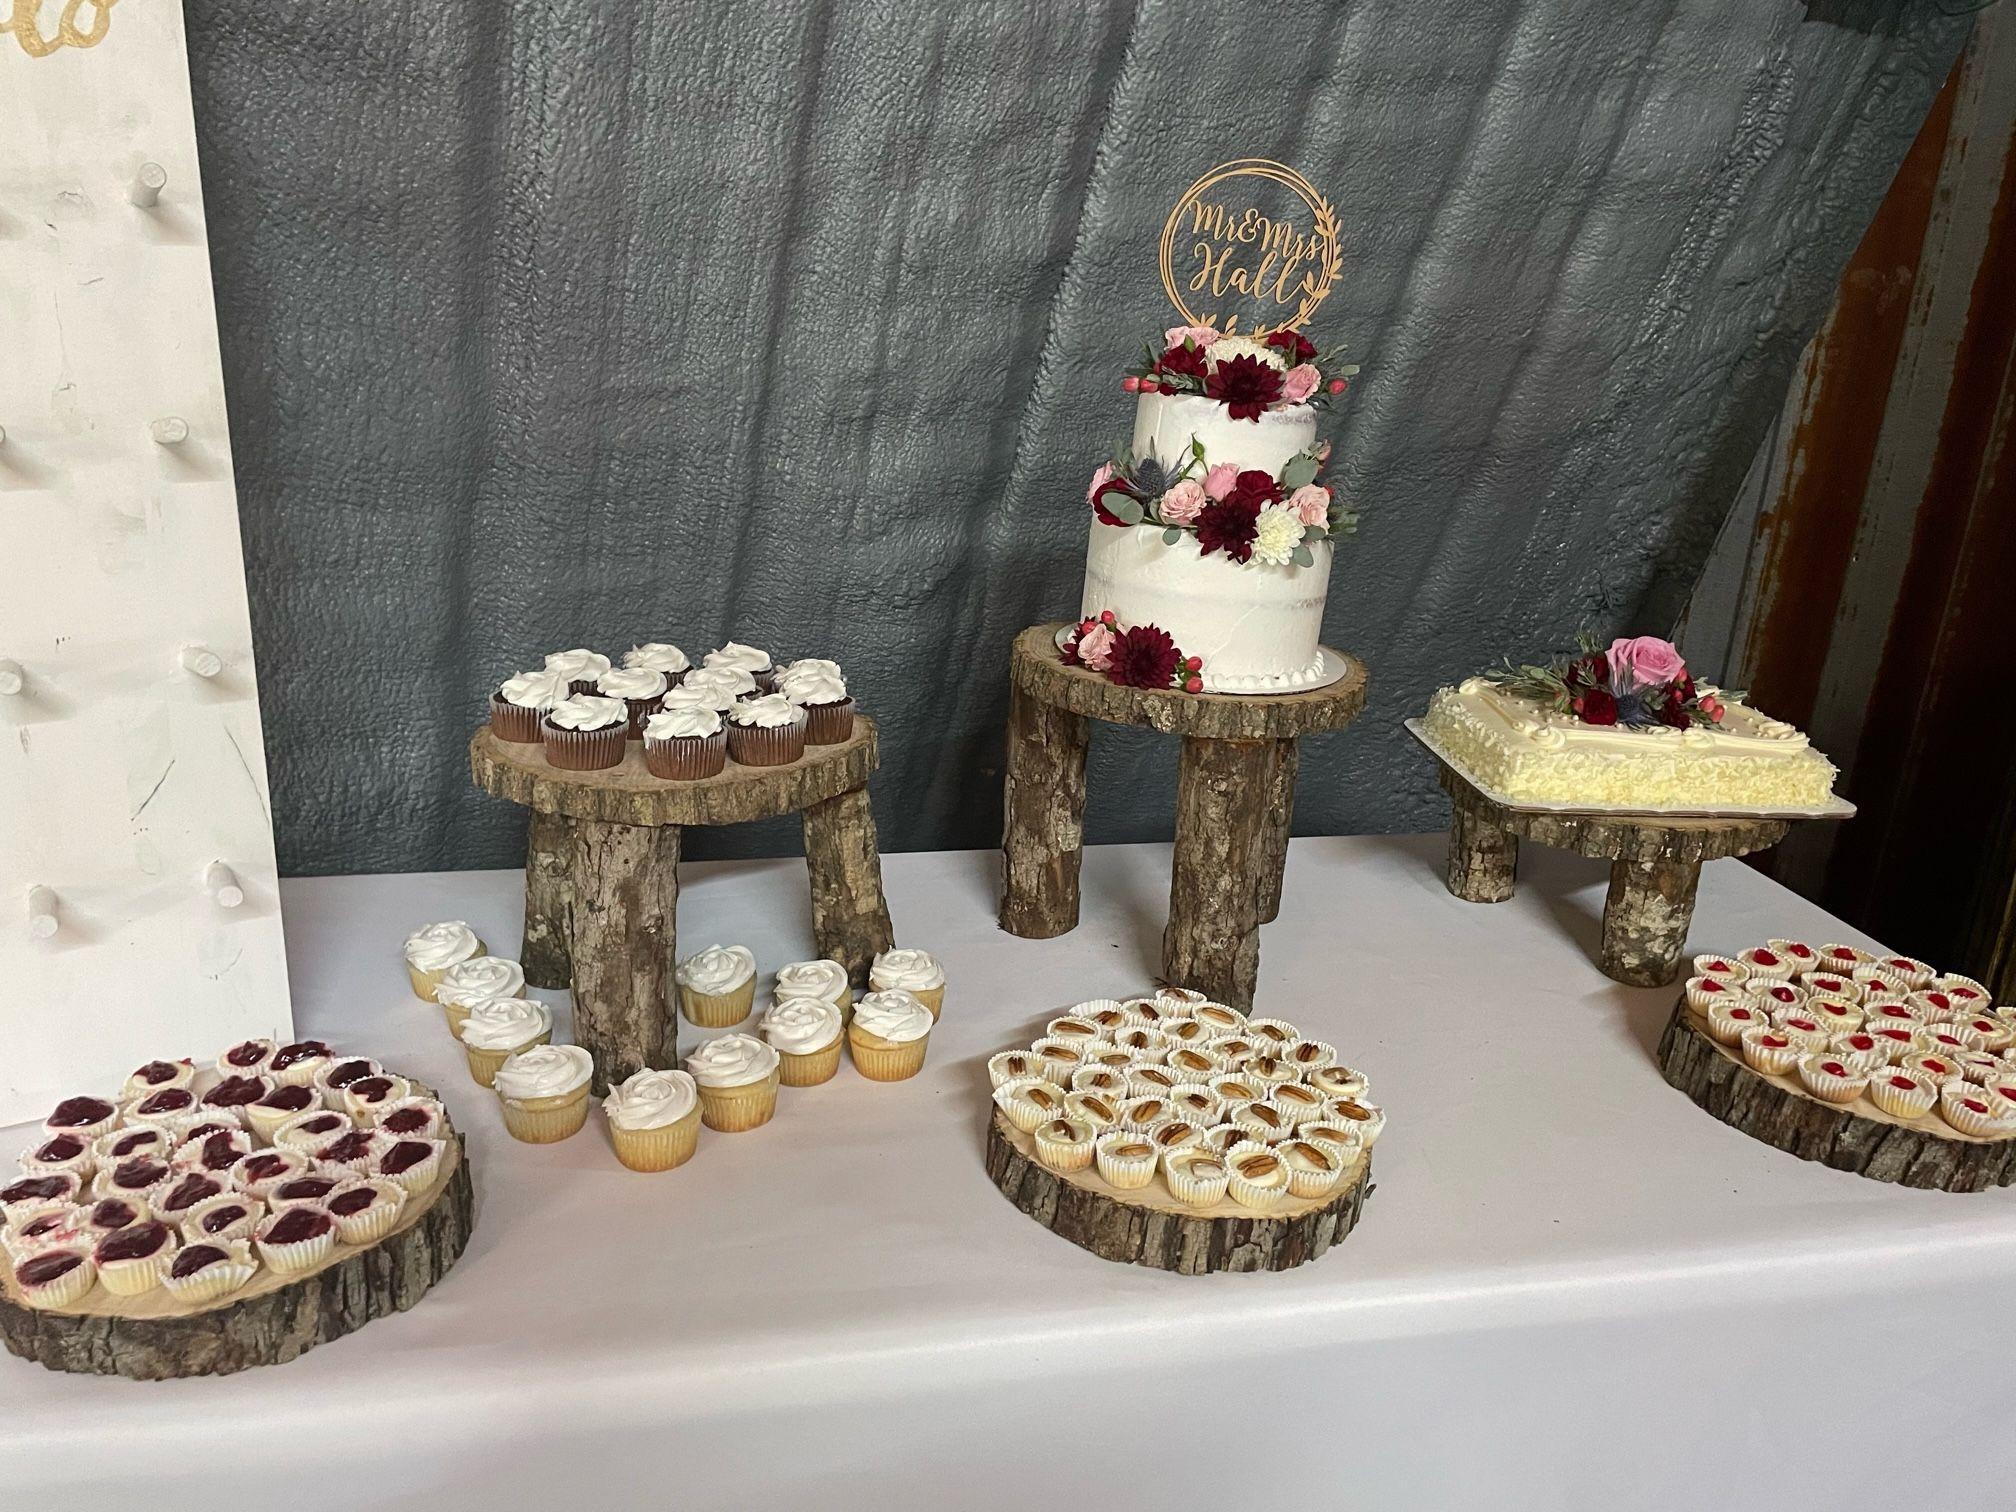 An array of desserts surround the 3-tier wedding care and groom's cake